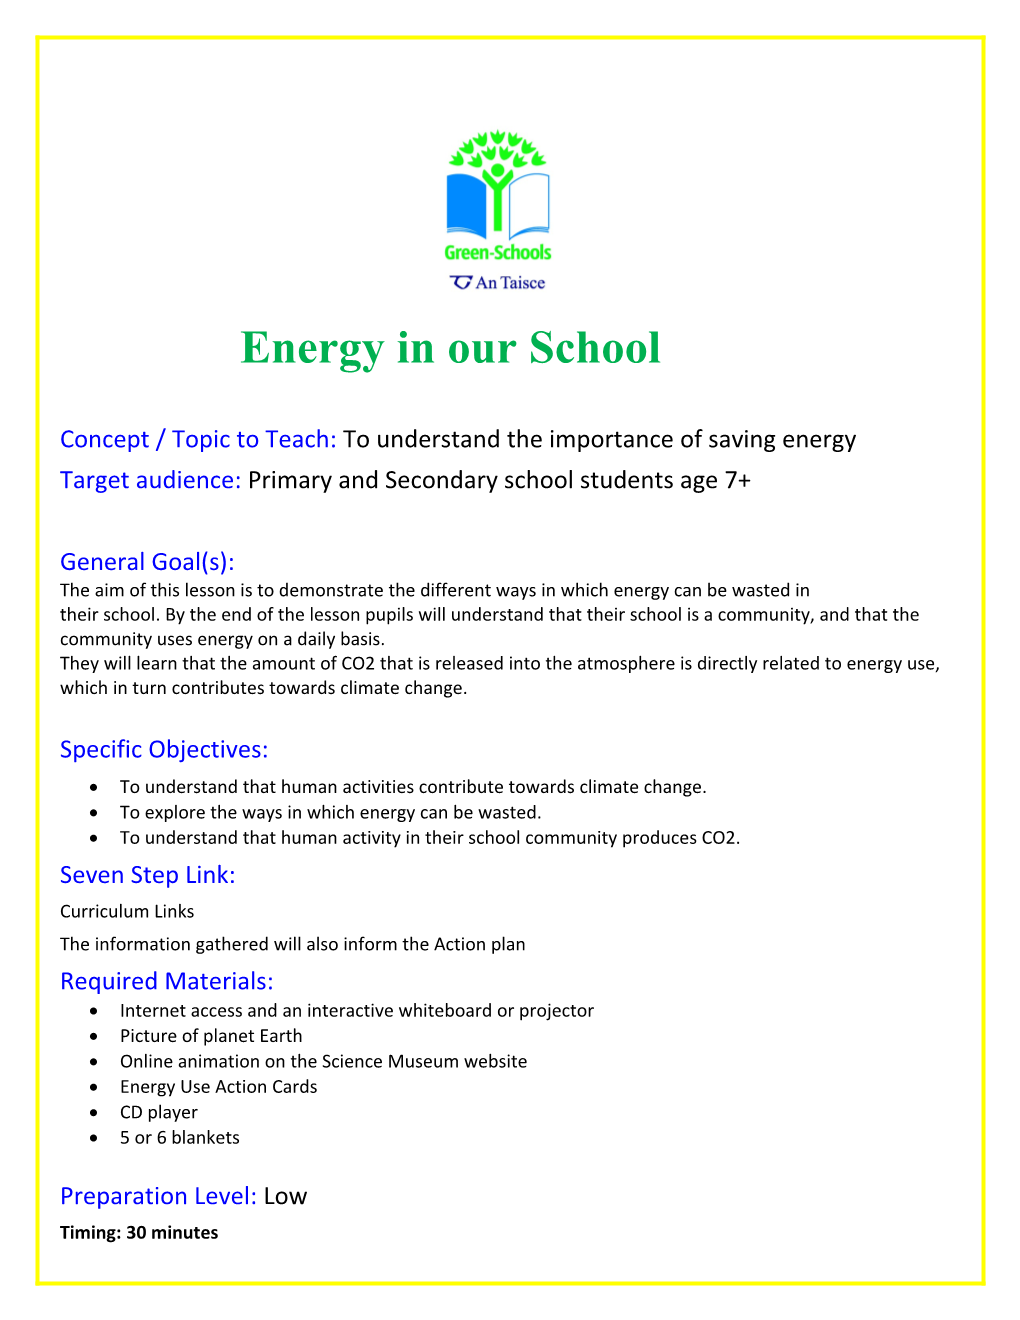 Energy in Our School